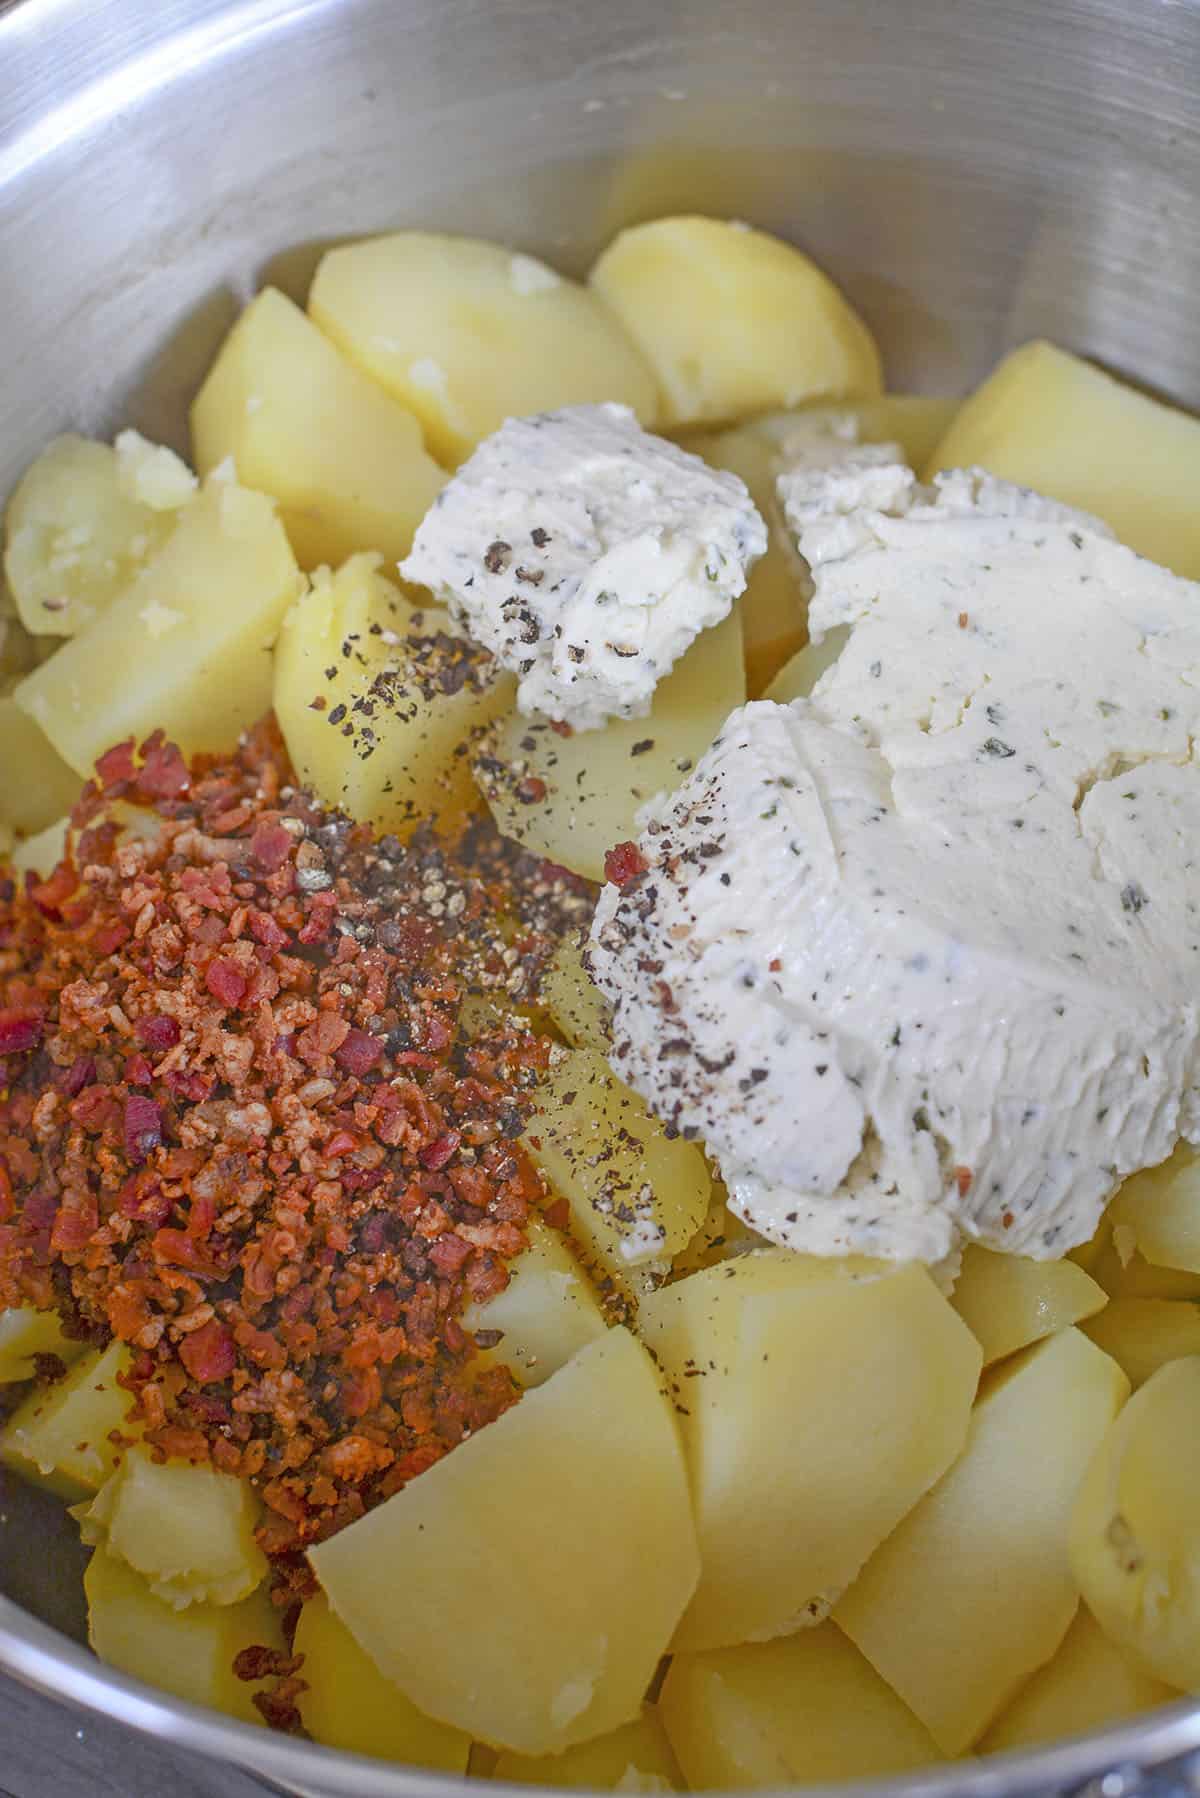 All the ingredients added to the bowl of boiled potatoes, ready to mash.